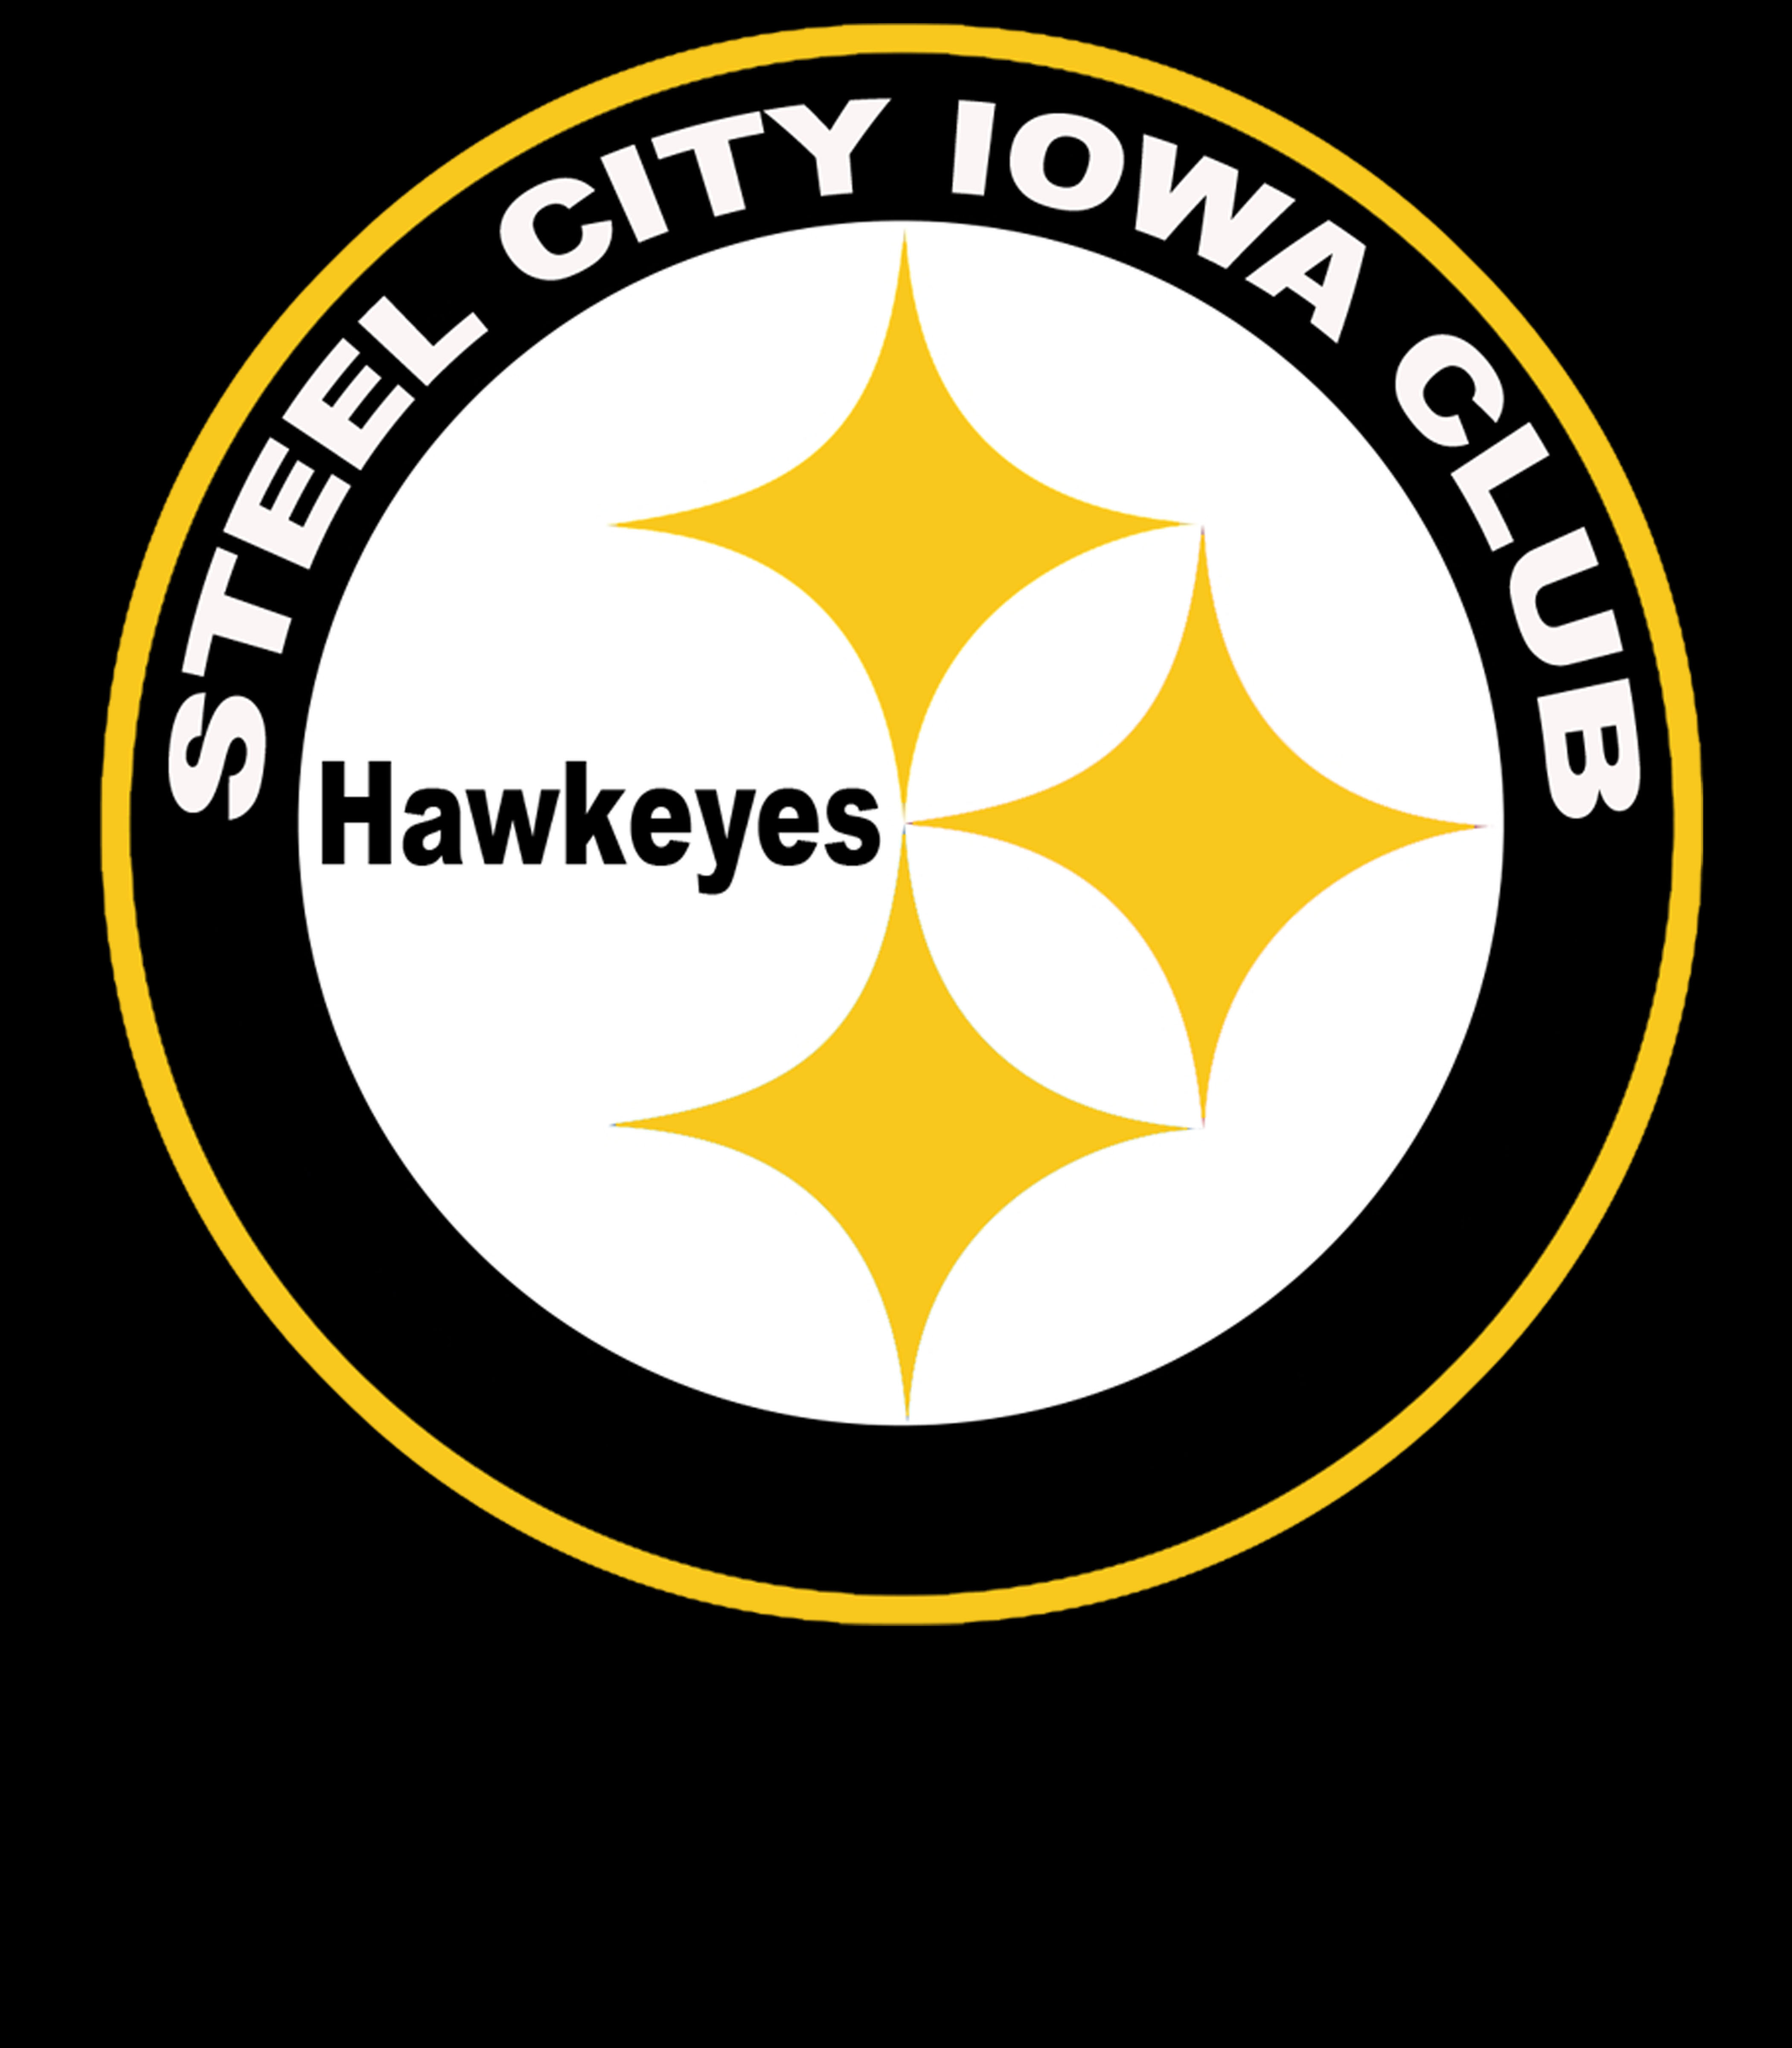 steel cty seal